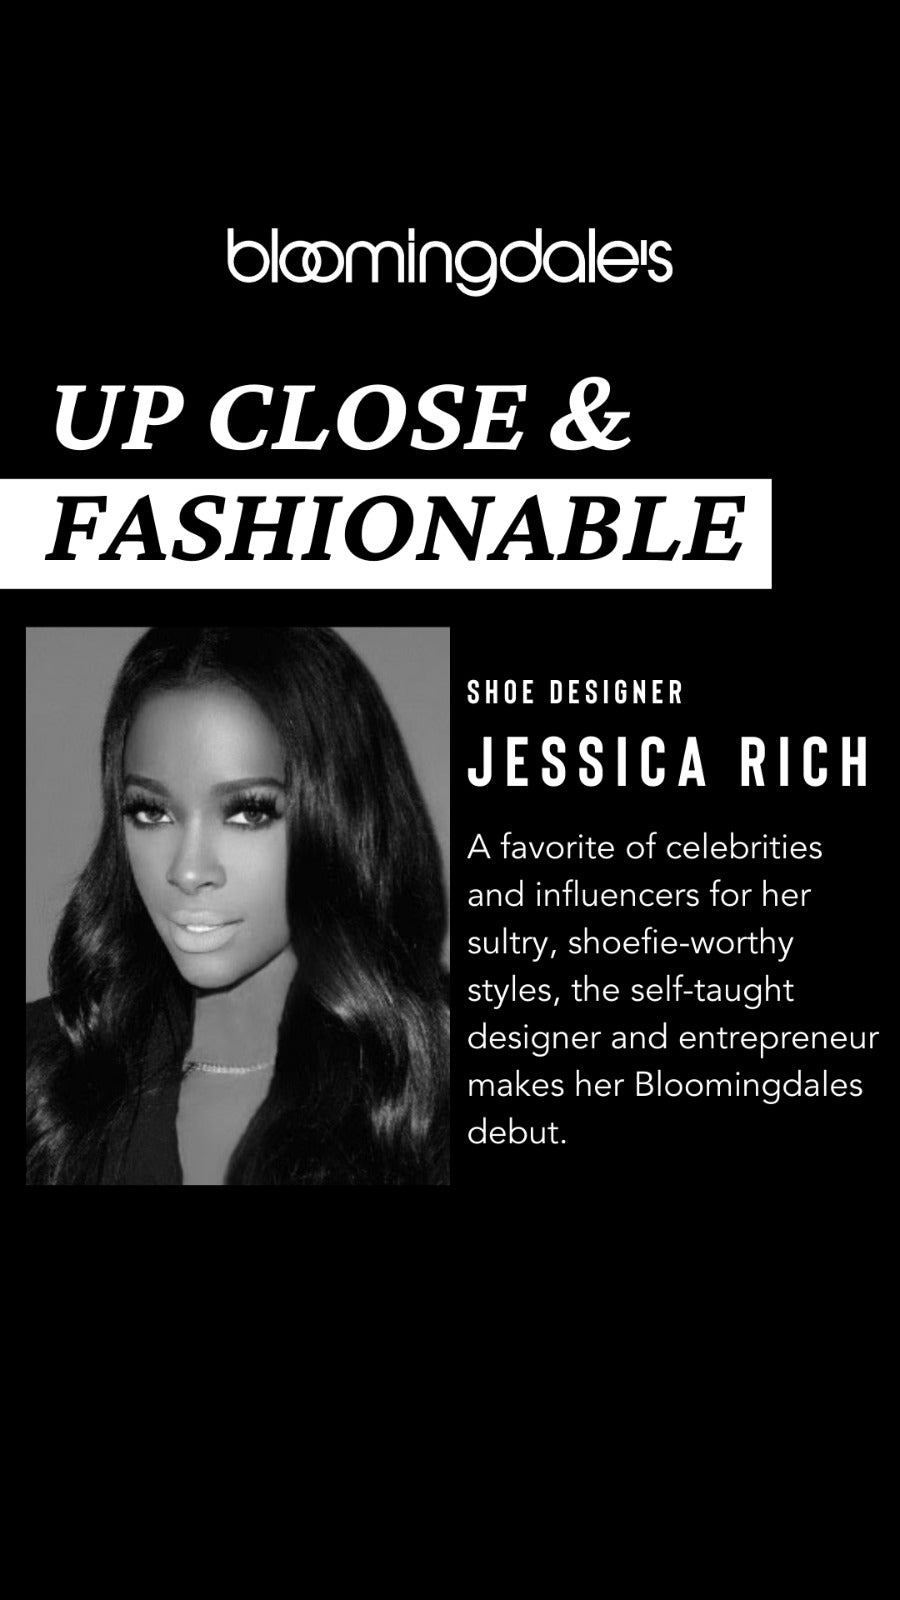 JESSICA RICH SITS DOWN WITH BLOOMINGDALES